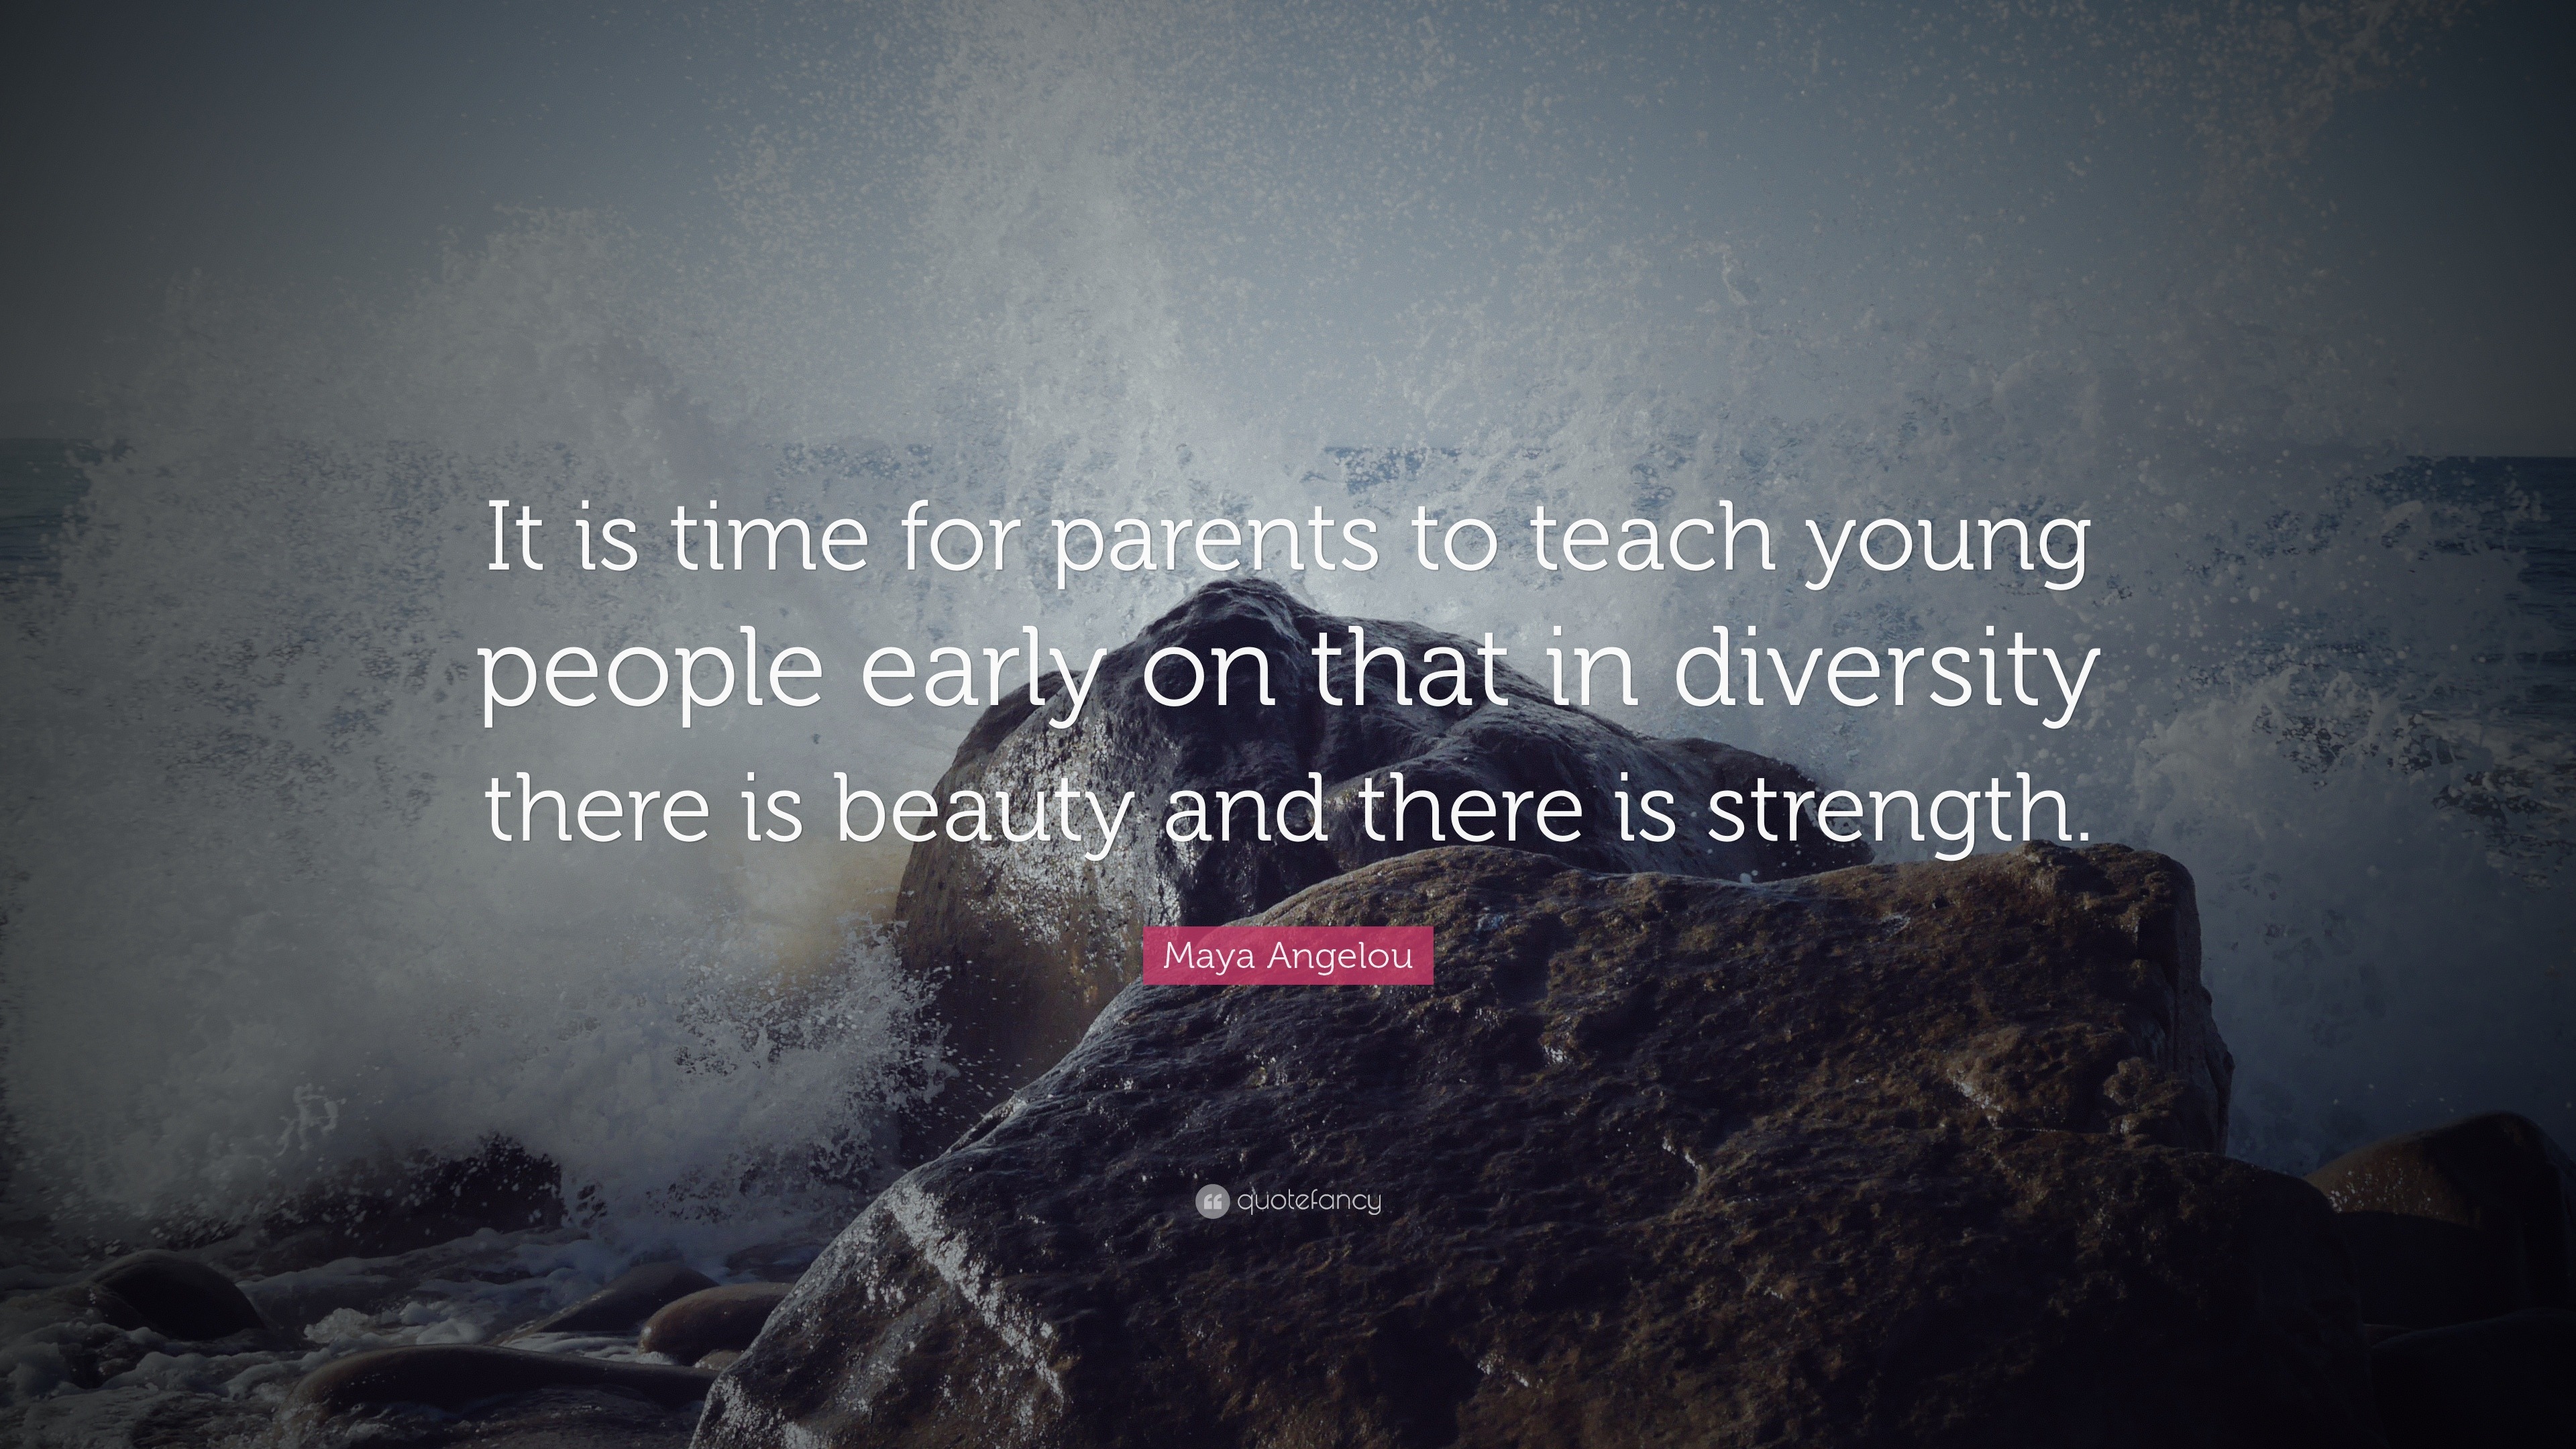 Maya Angelou Quote: "It is time for parents to teach young ...